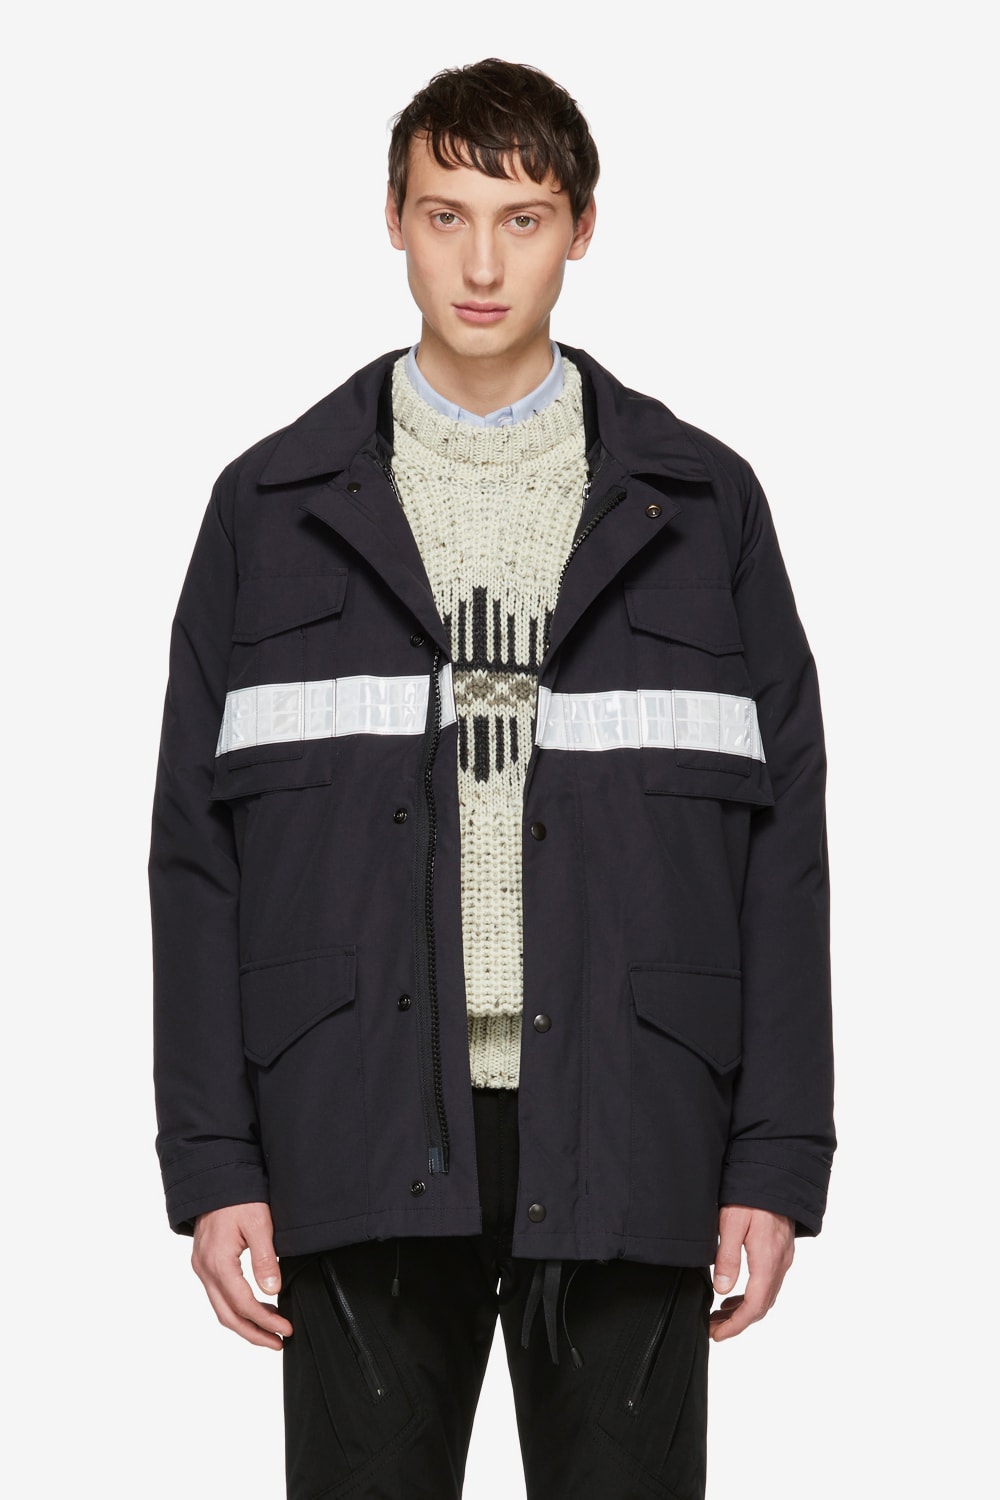 Junya Watanabe Canada Goose Fall Winter 2018 Jackets Outerwear Gore Windstopper reflective coat down parka double layer edition hooded